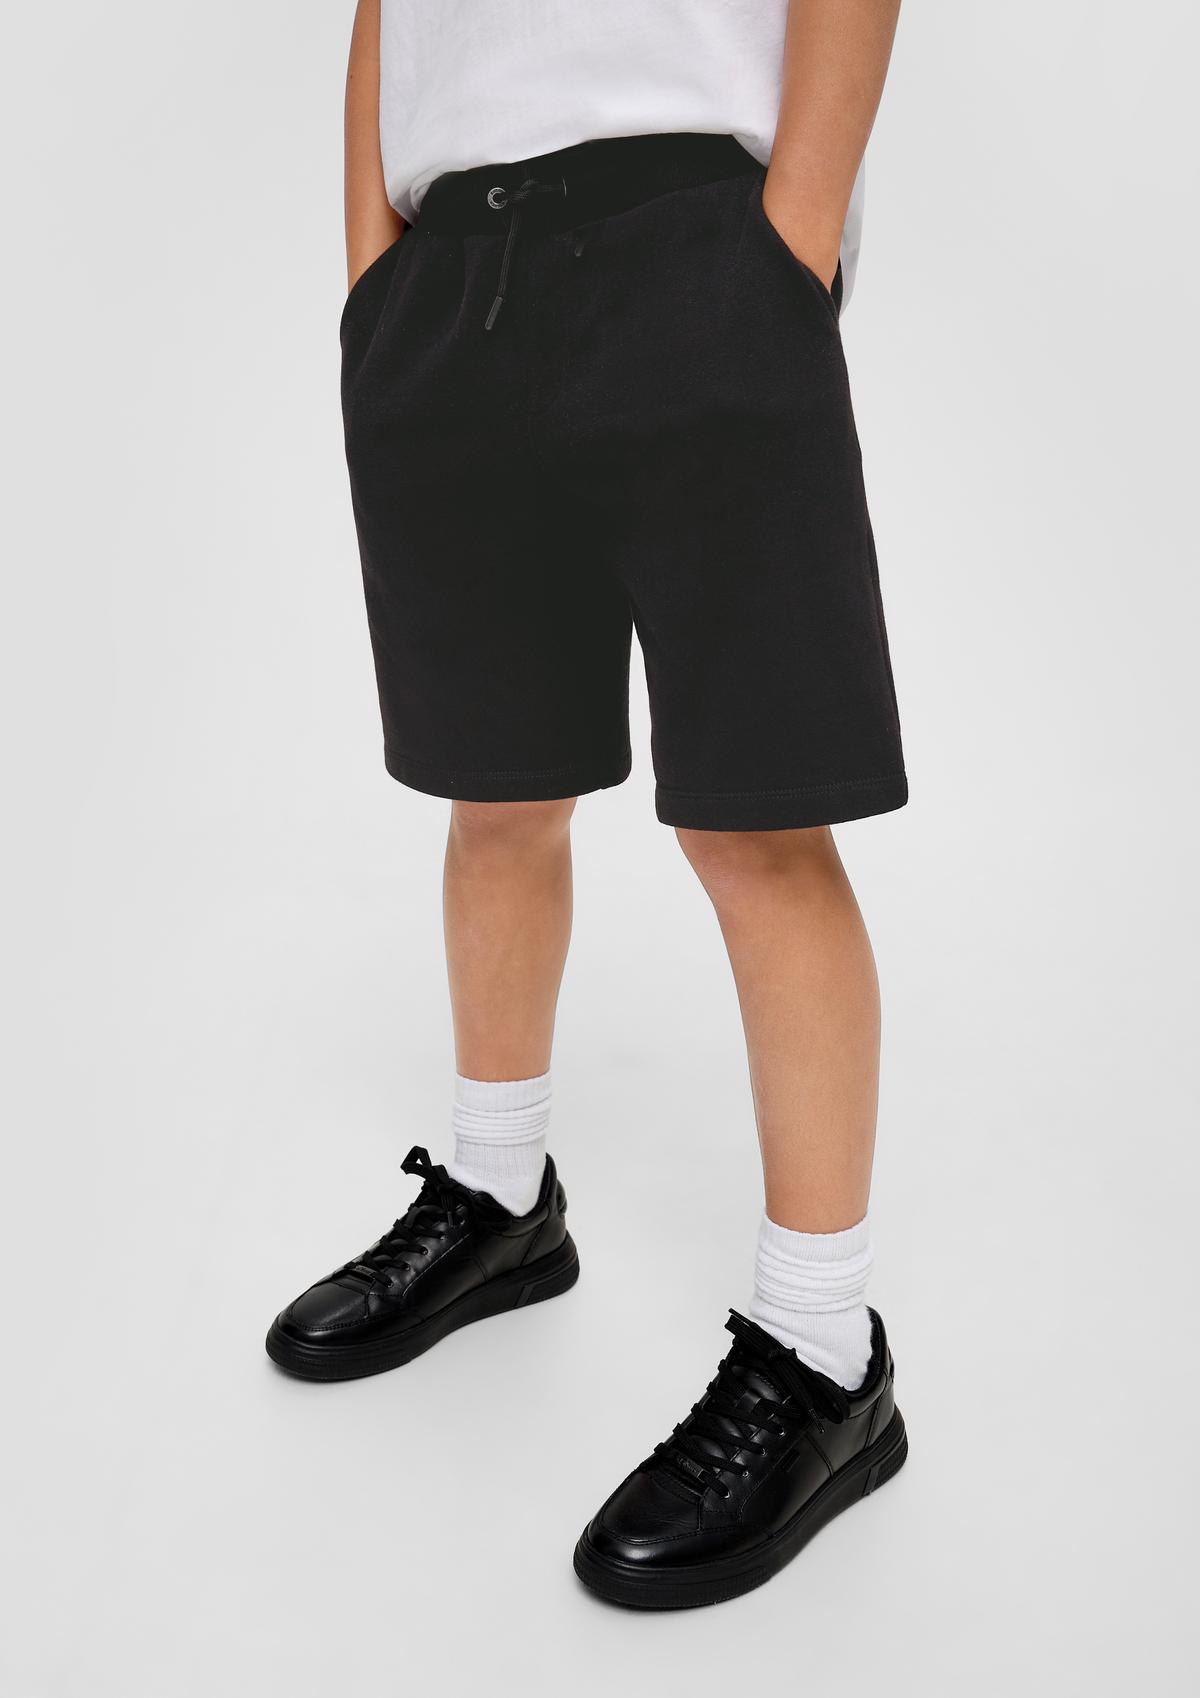 for shorts boys Find teens Bermuda and online